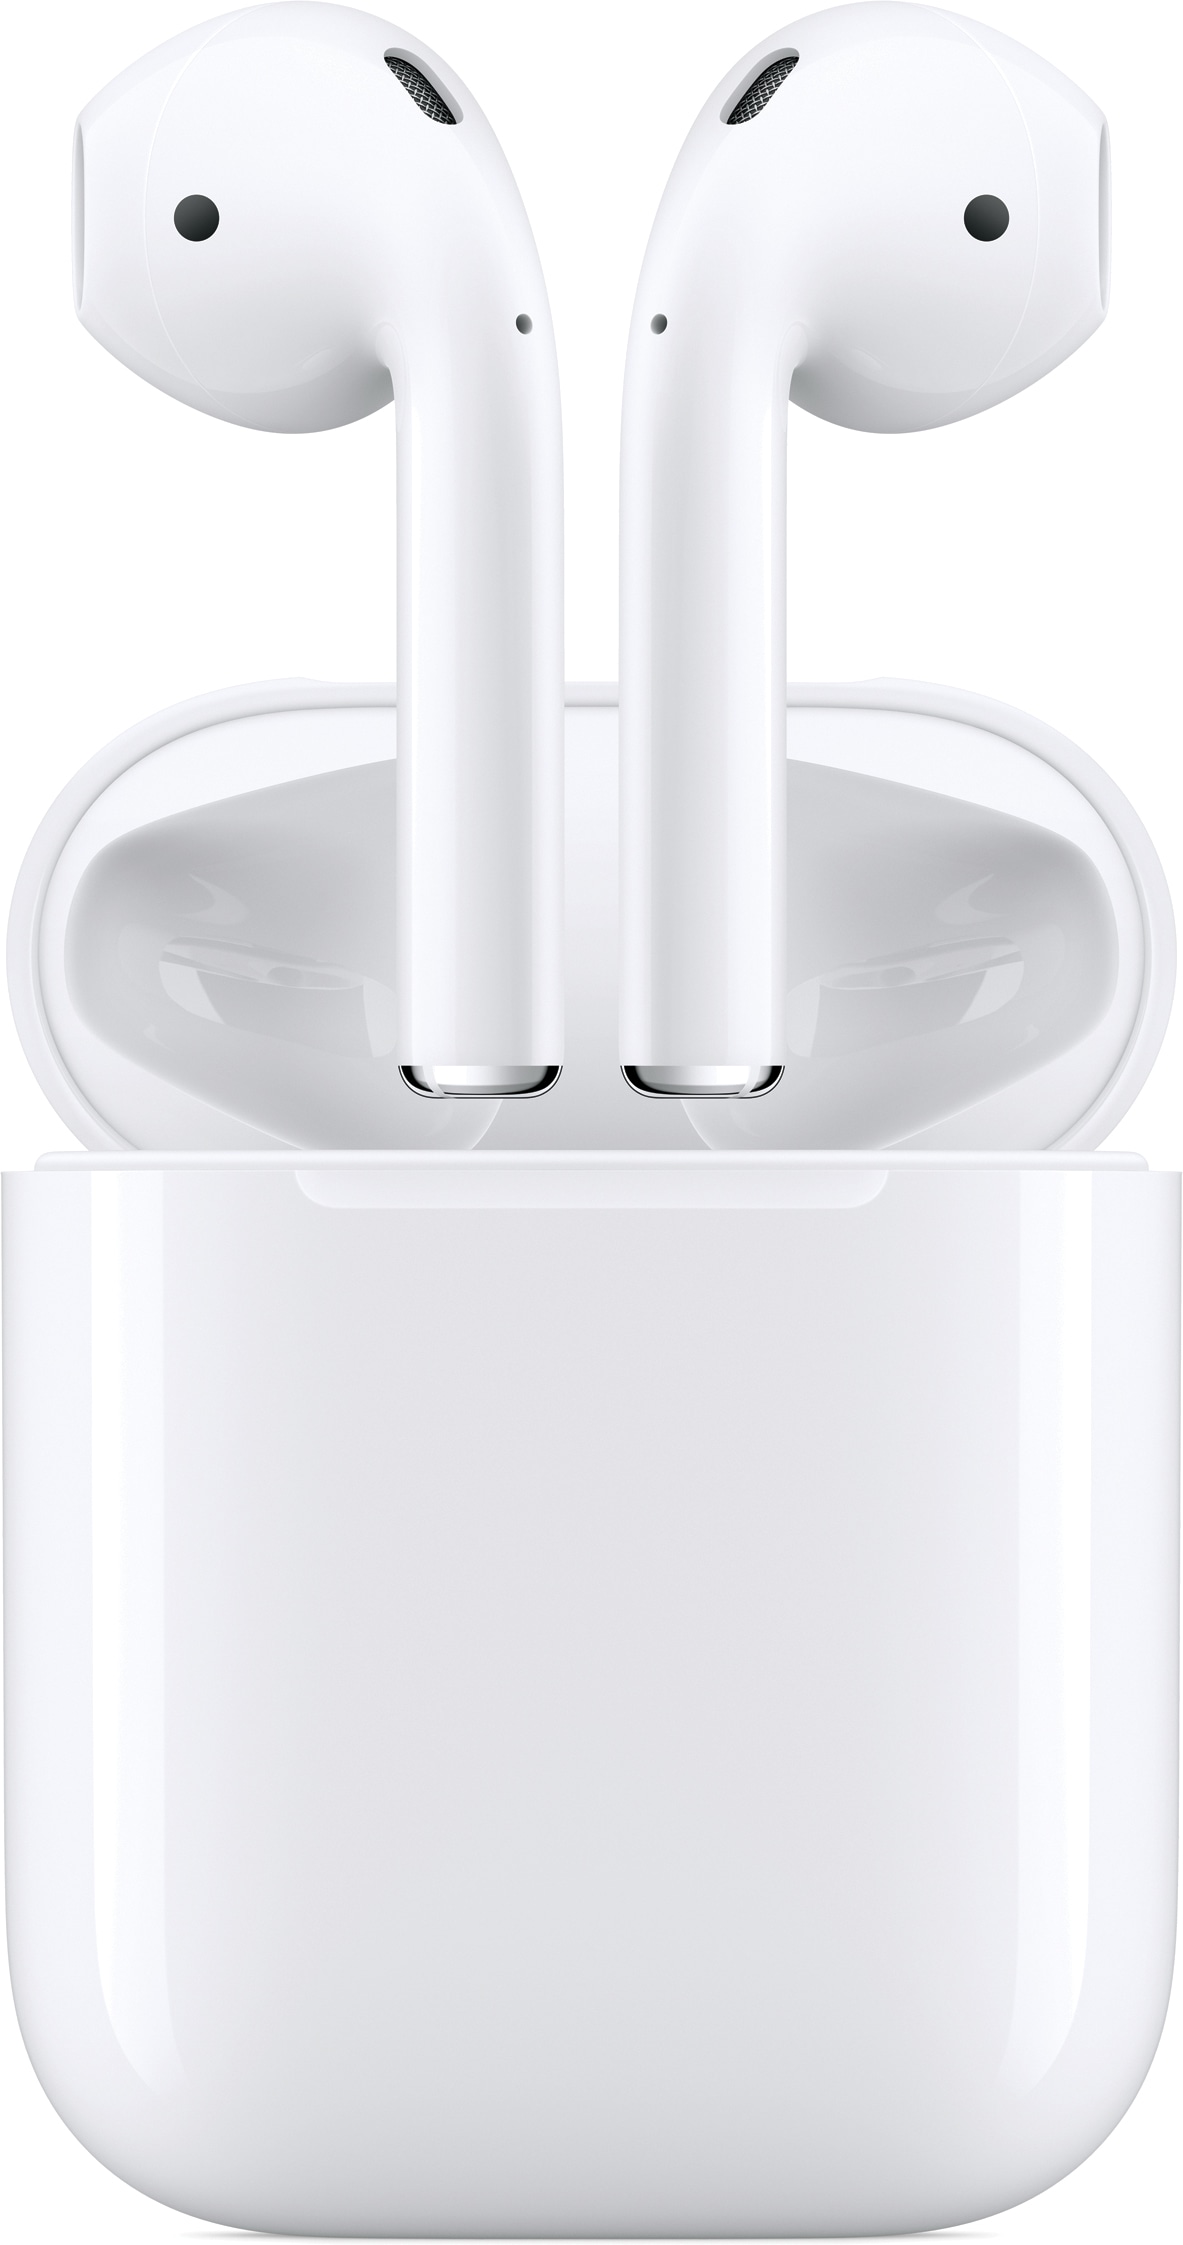 AirPods in the box